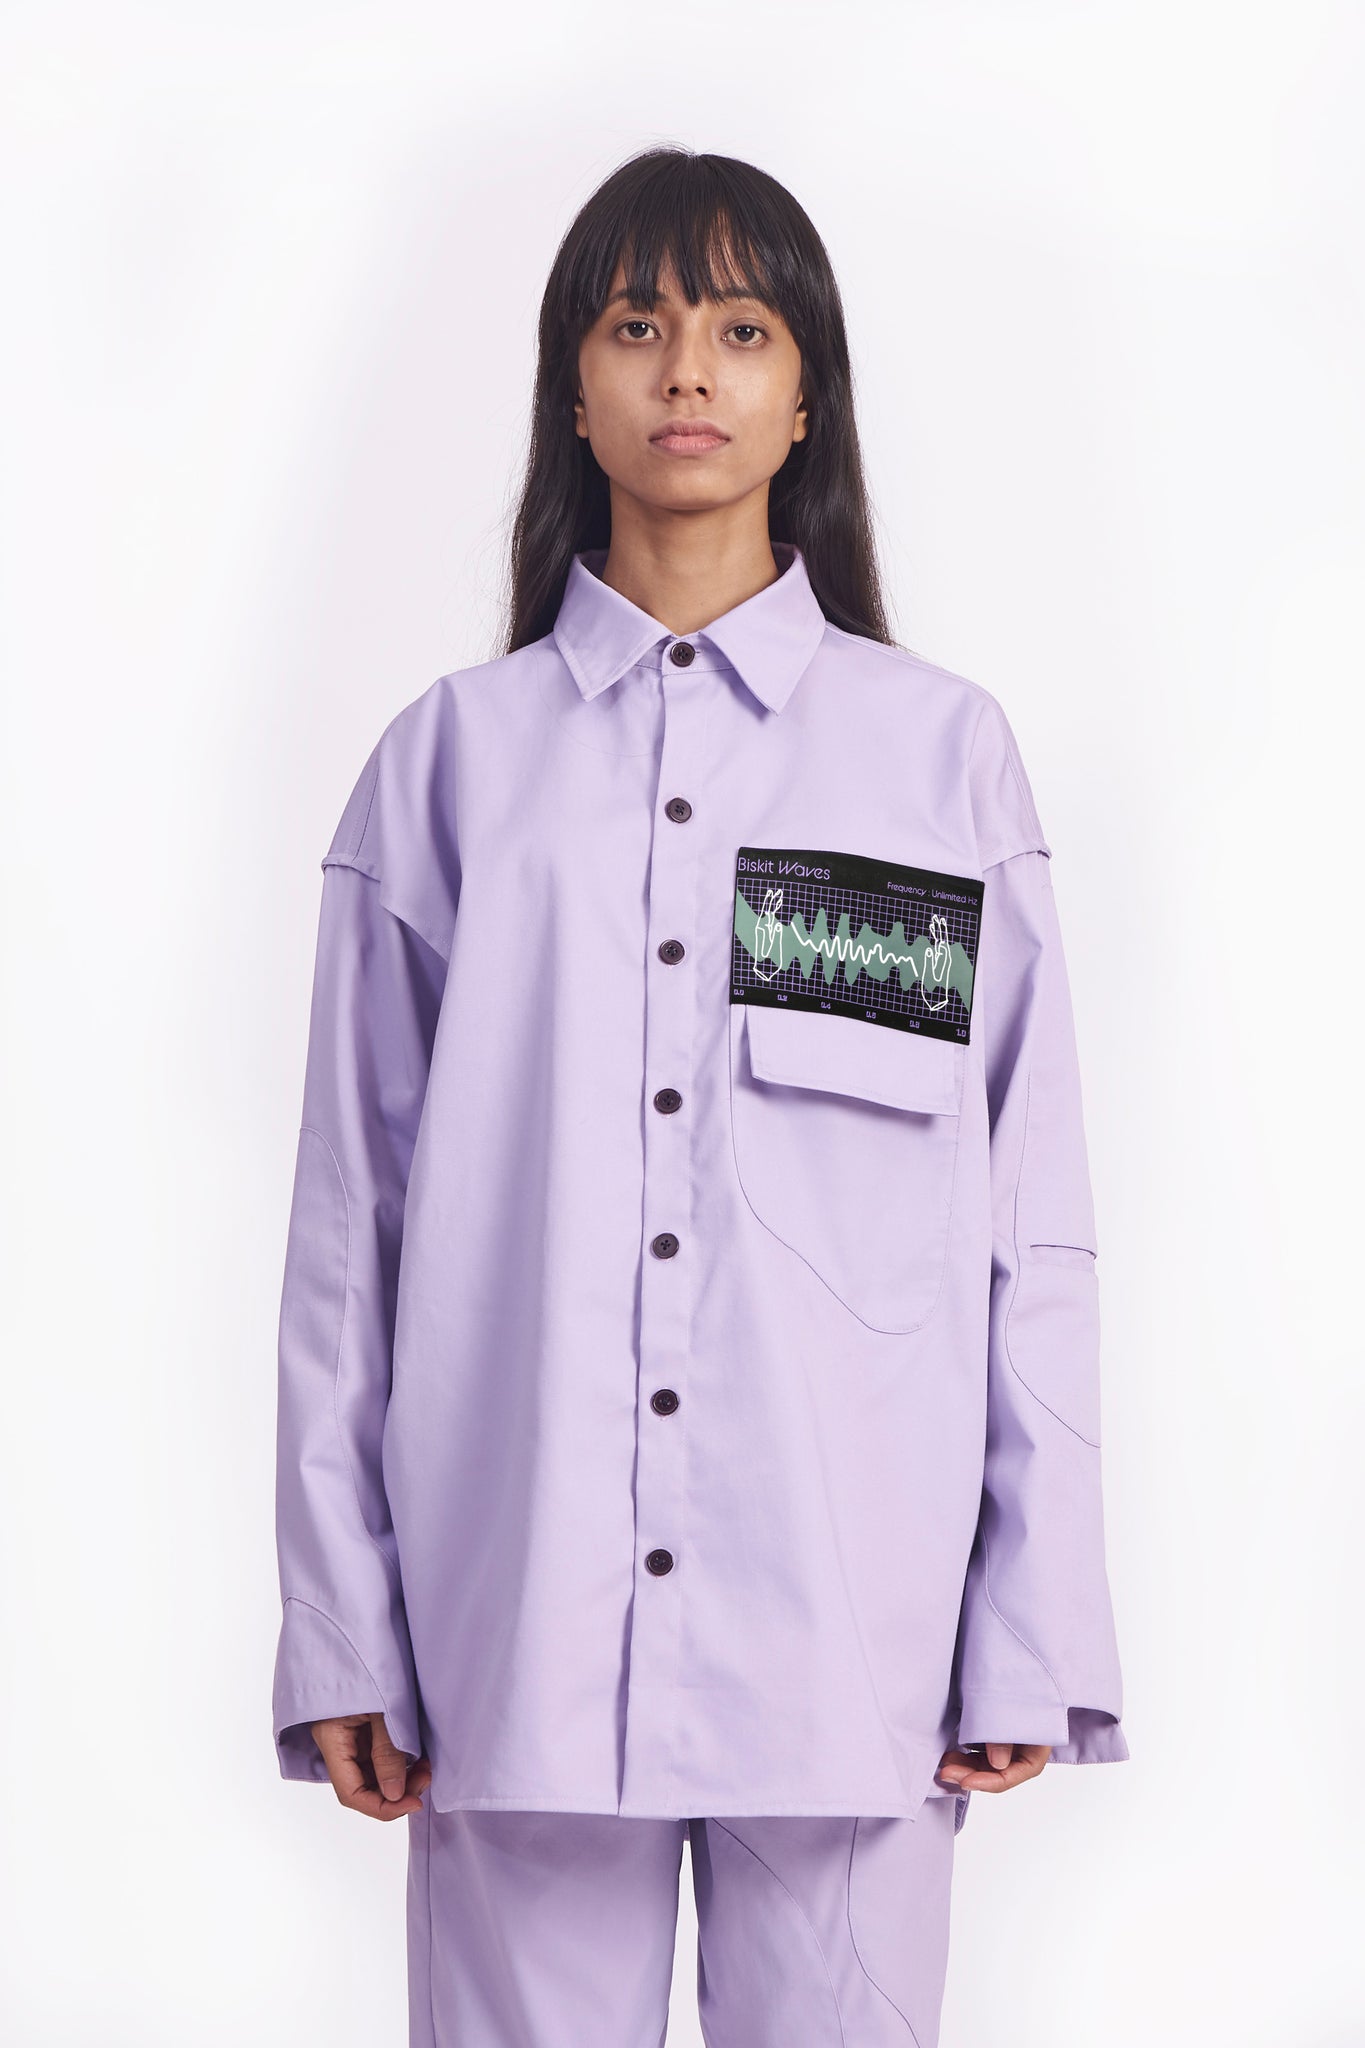 This medium weight lavender shirt / over shirt features front black natural corozo buttons, a flap pocket, our ‘Biskit waves Frequency’ printed patch, pocket on the left sleeve and irregular shapes patched on the front, back and sleeves.